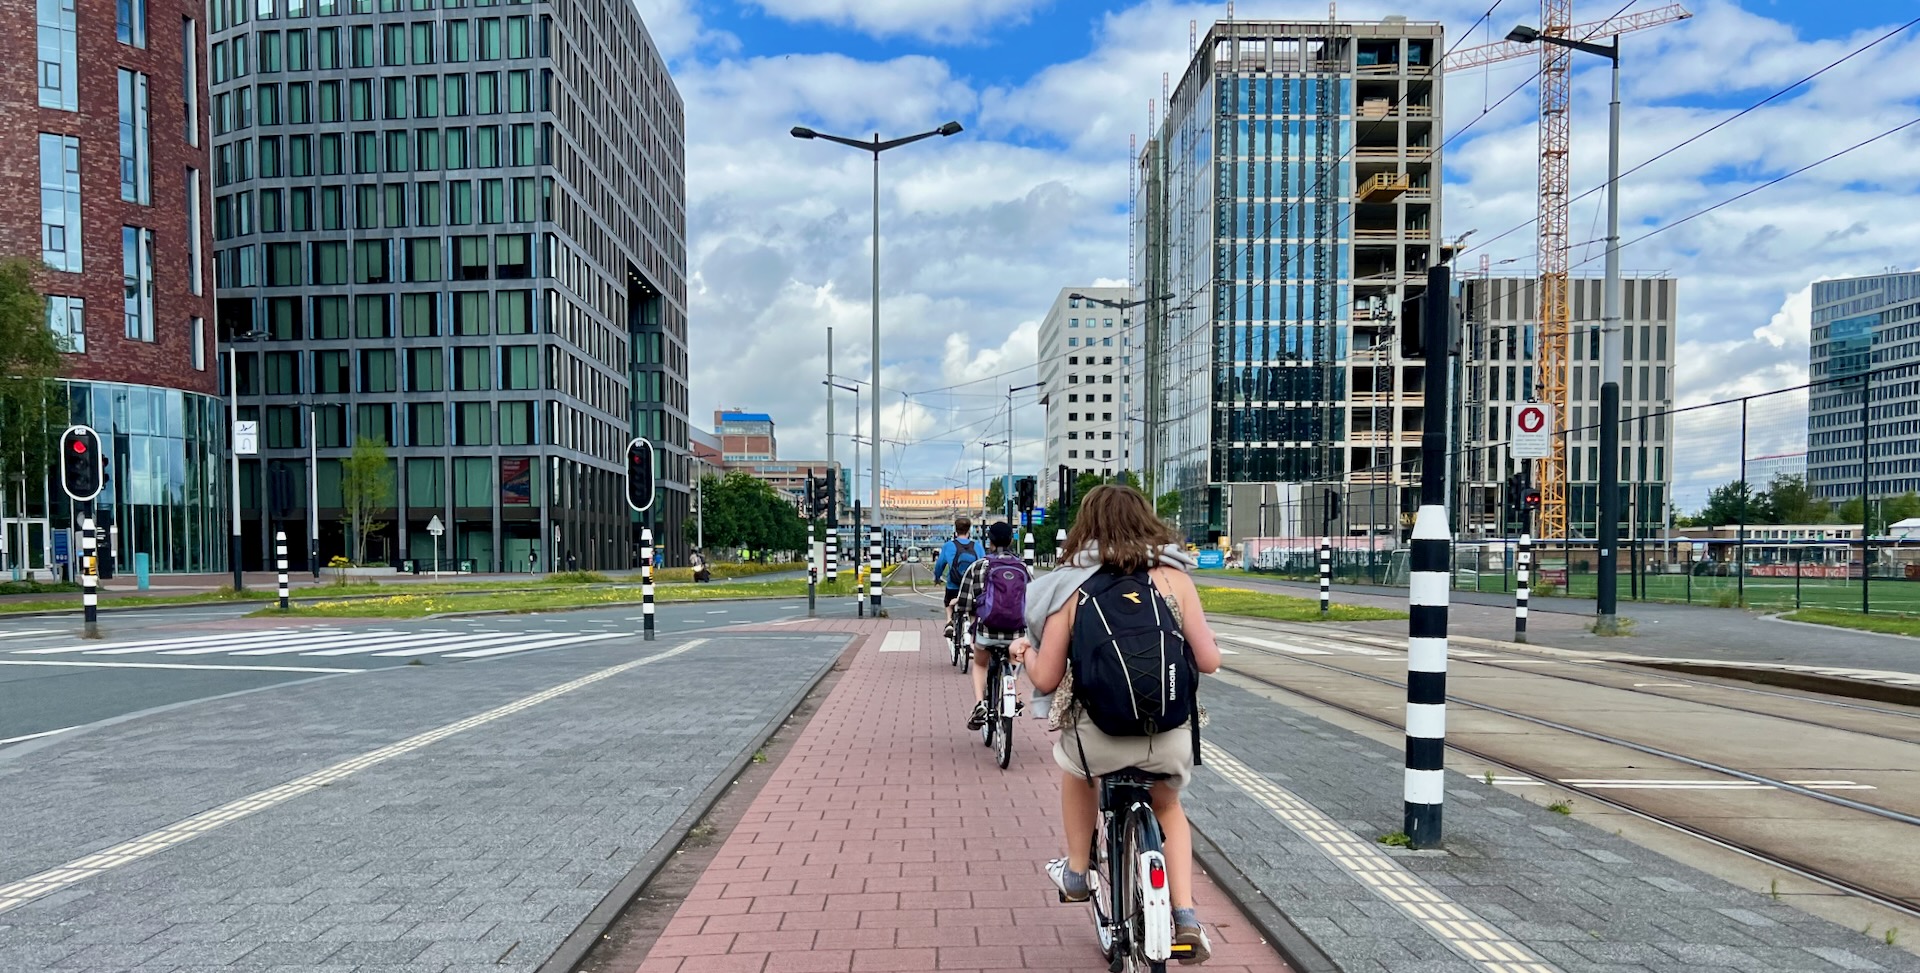 On bikes in a more modern district of the city.